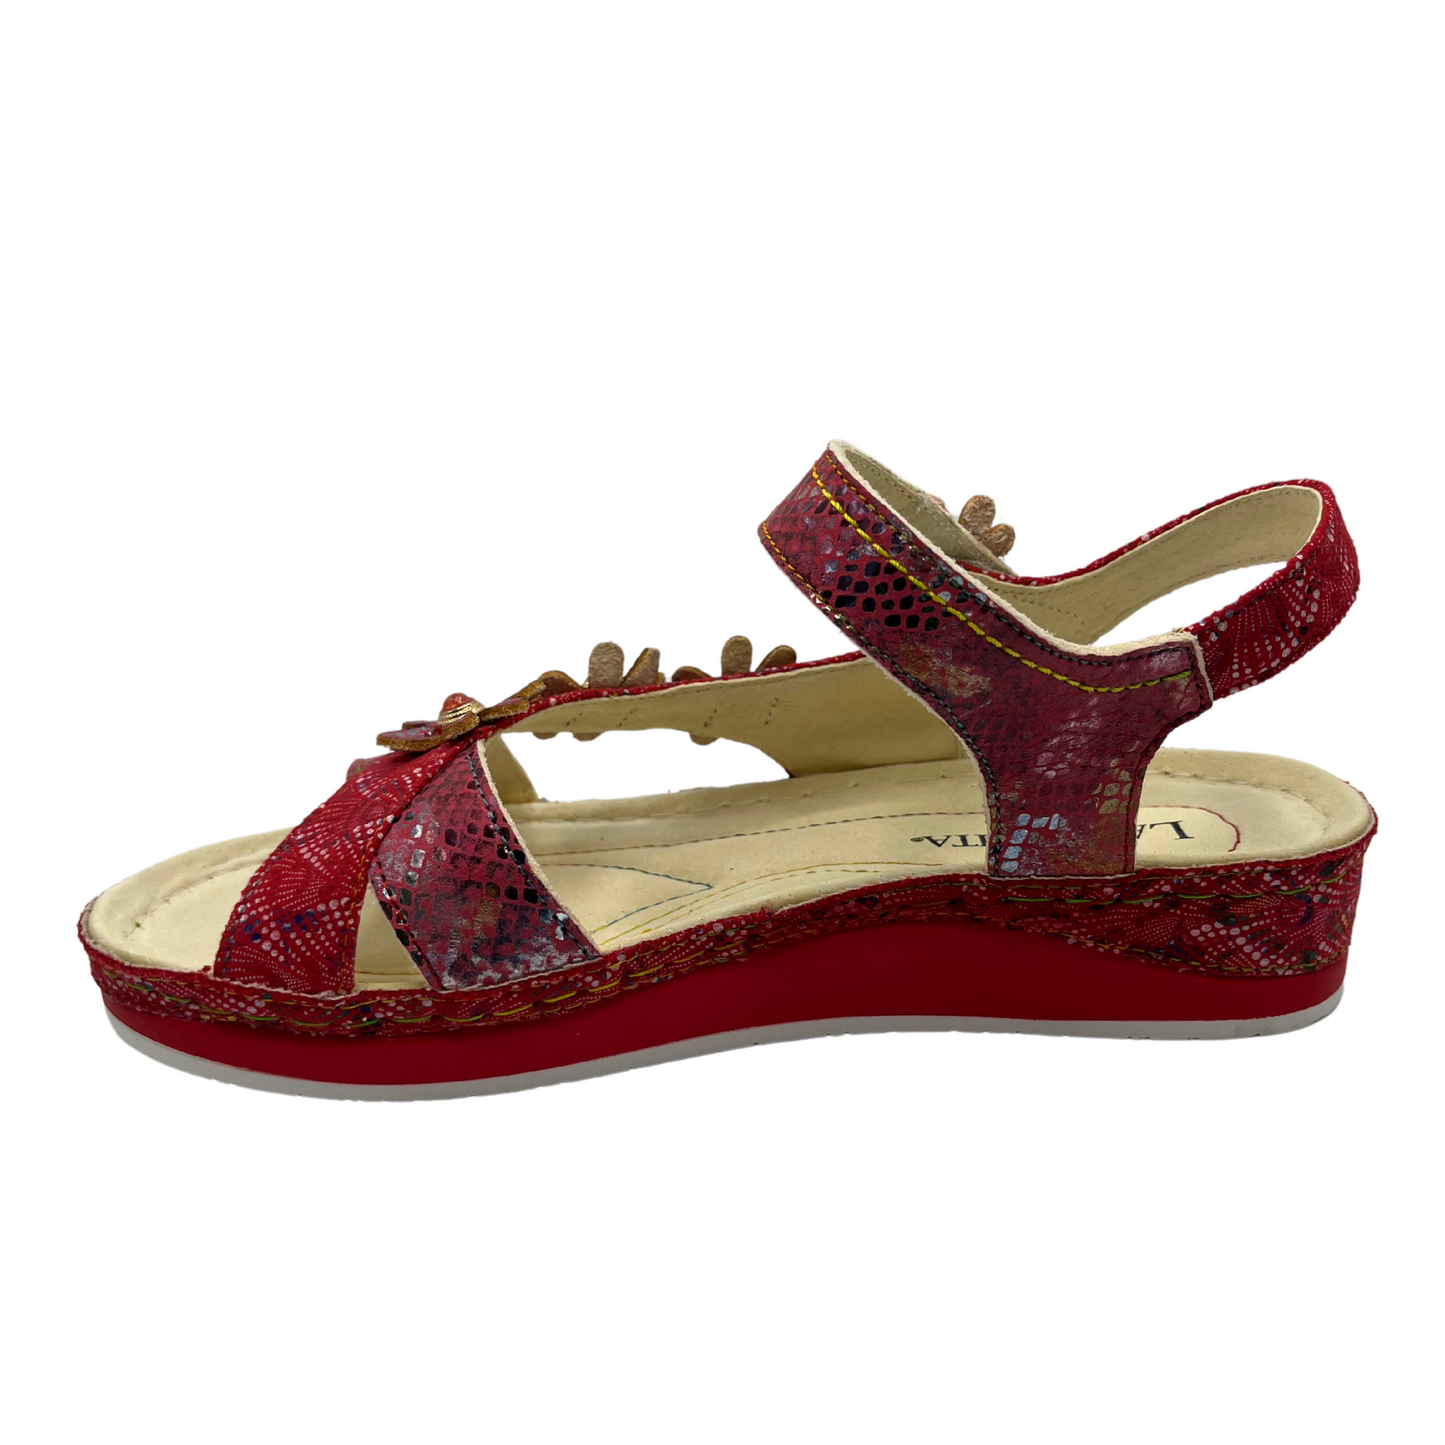 Left facing view of a red leather sandal with flower details and velcro ankle strap